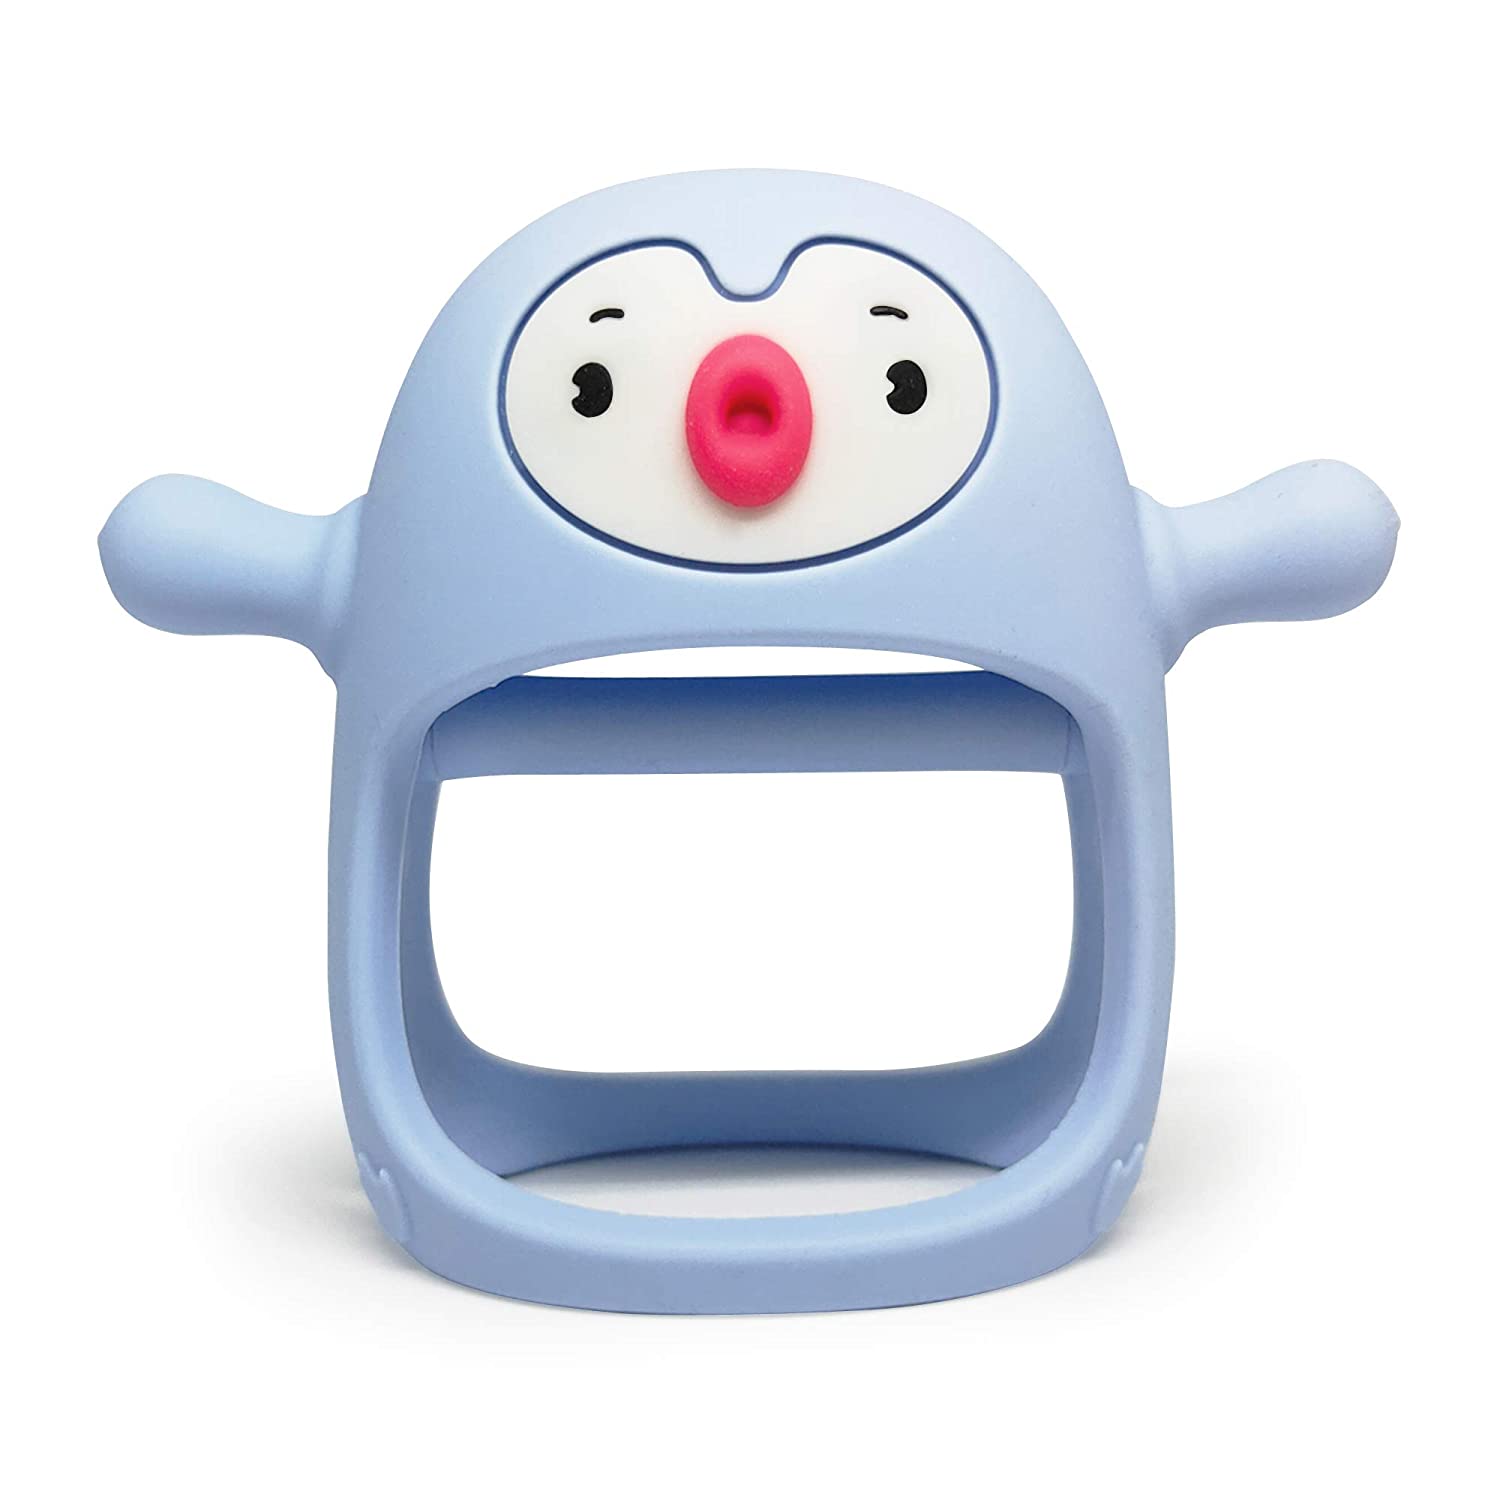 Smily Mia Penguin Buddy Never Drop Silicone Baby Teething Toy for 0-6month Infants, Baby Chew Toys for Sucking Needs, Hand Pacifier for Breast Feeding Babies, Car Seat Toy for New Born, Light Blue